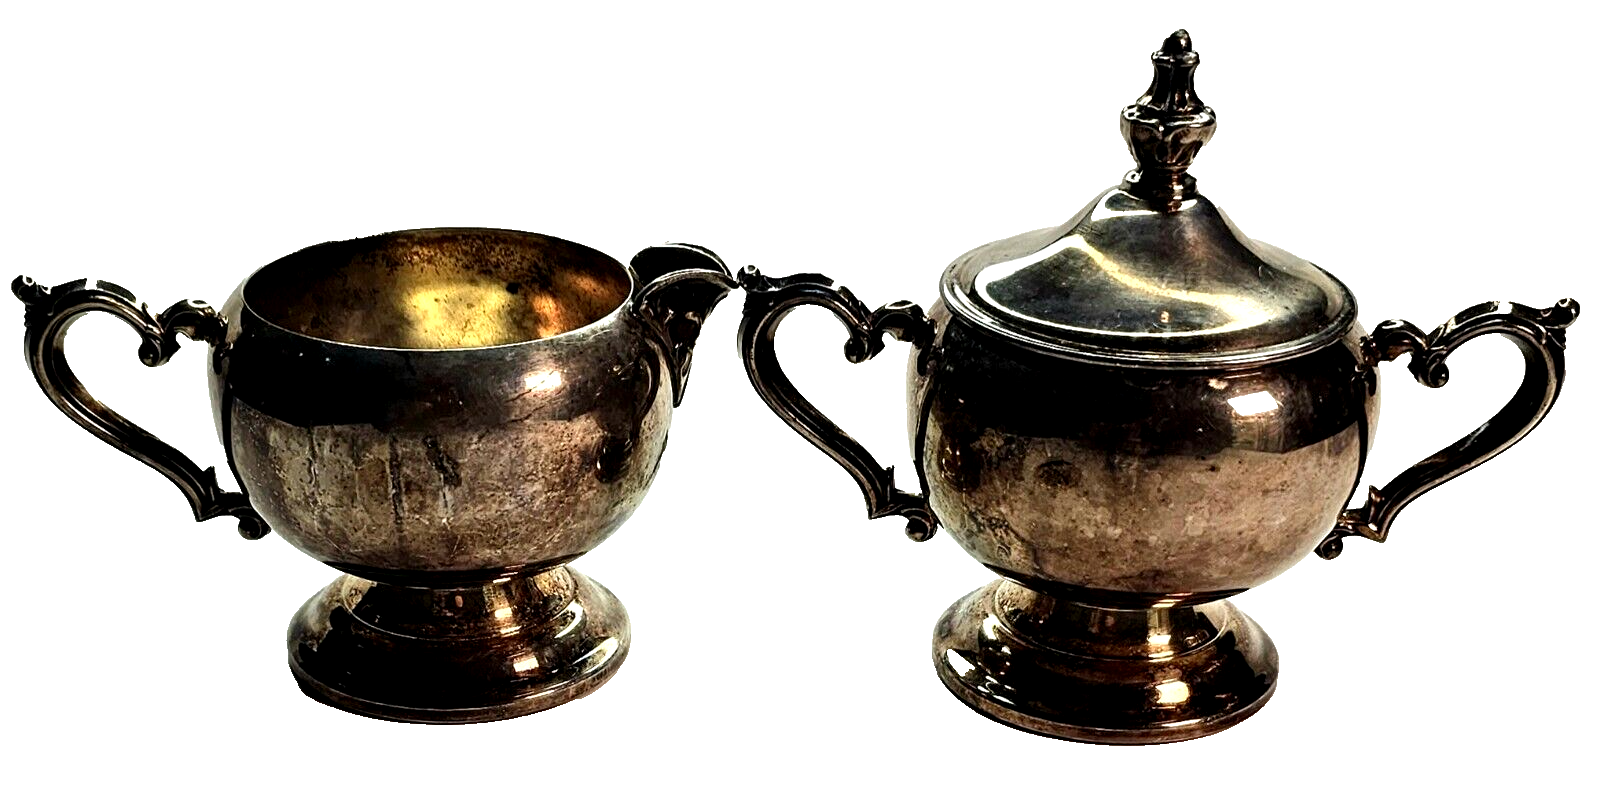 Vintage Patina Wm A Rogers Inspected Silver Plated Cream And Sugar Bowl With Lid - $31.99